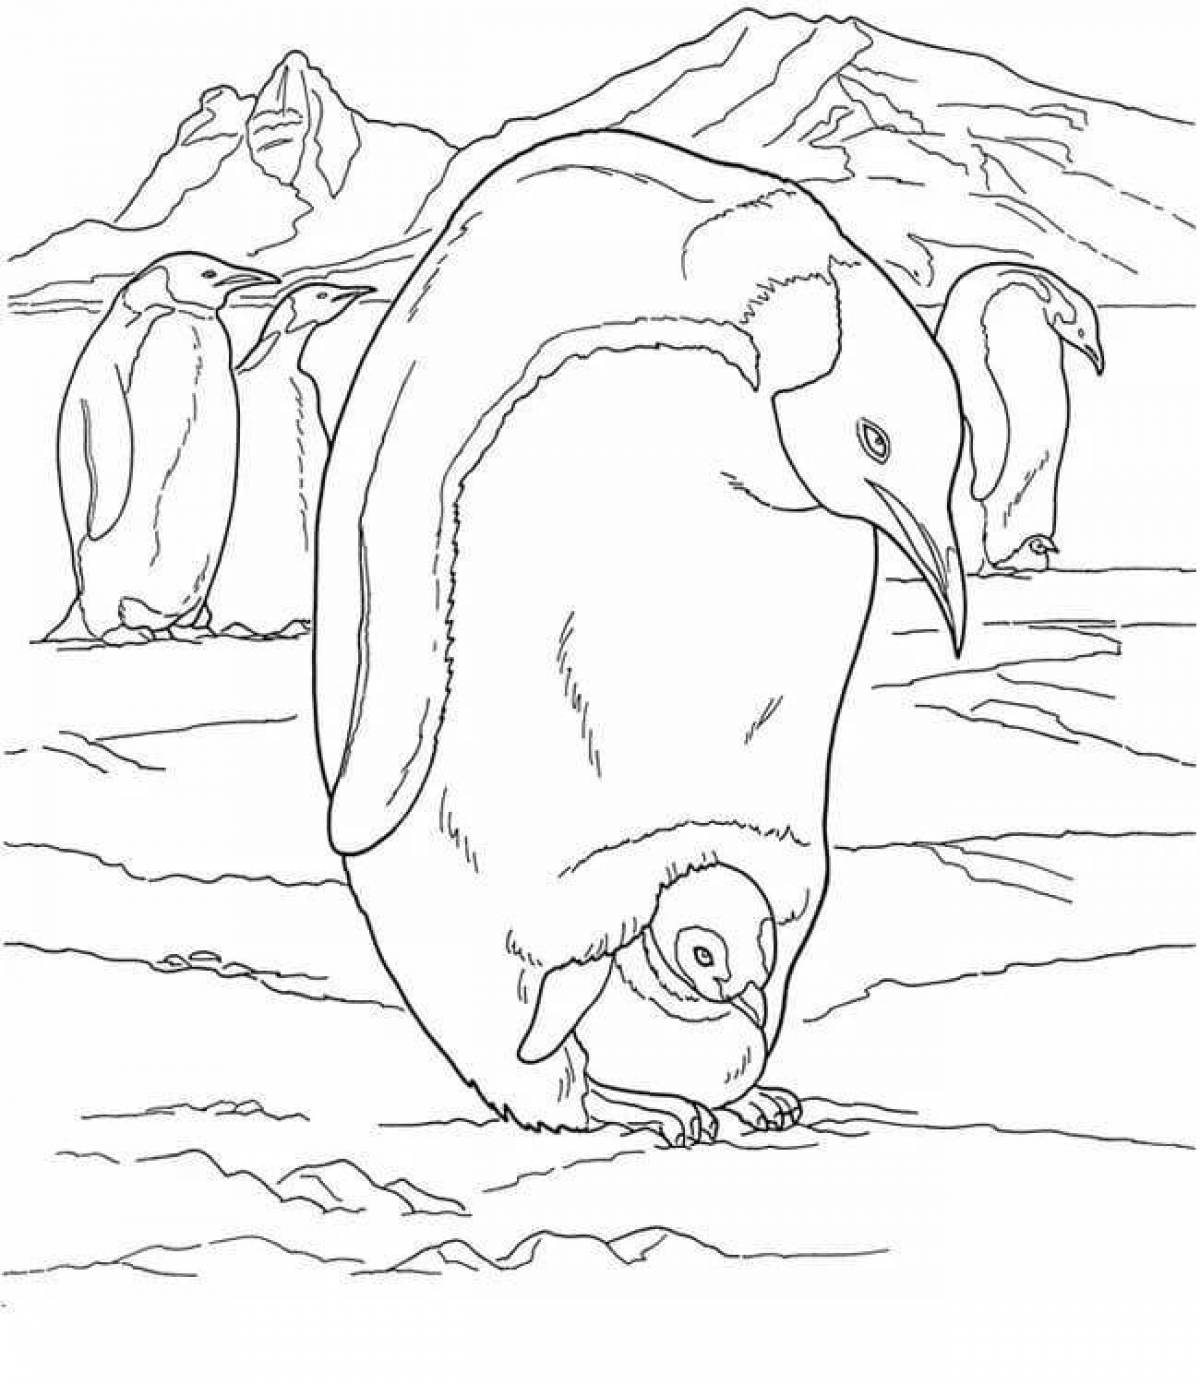 Colorful Antarctic krill feeding coloring page